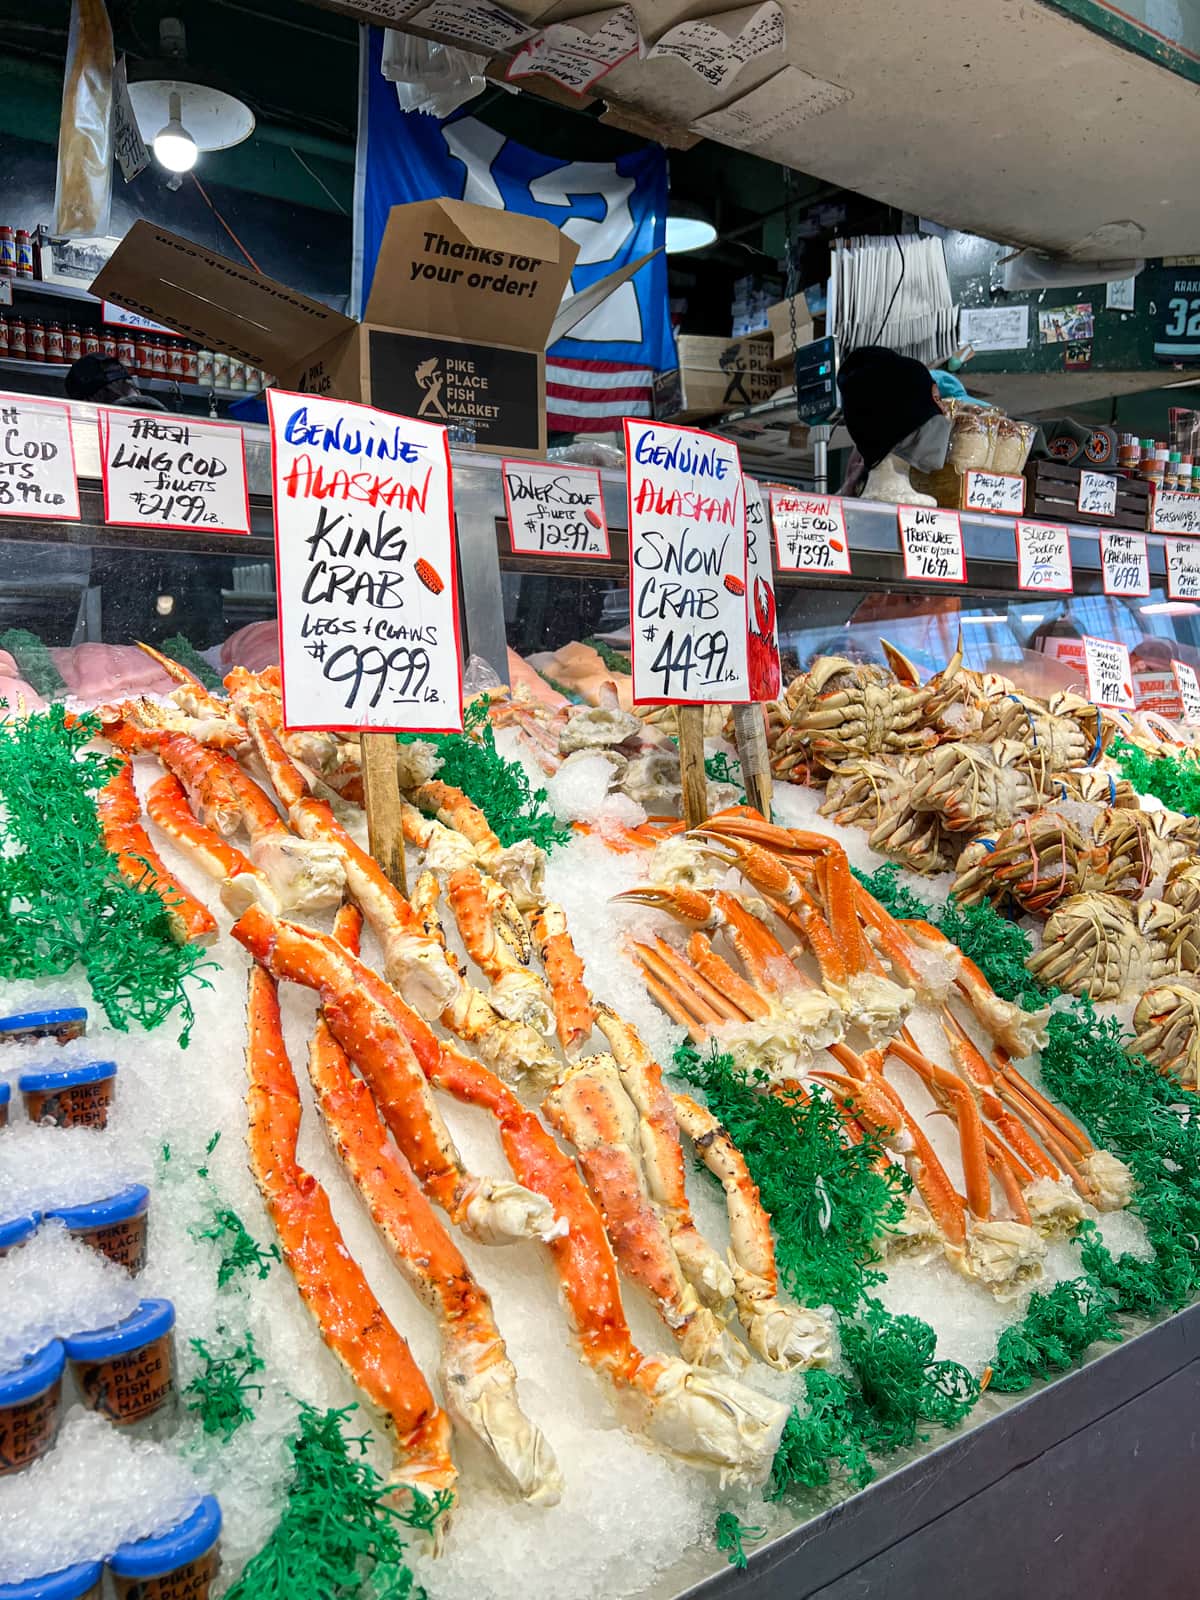 Alaskan king crab for sale at the Pike Place Fish Market